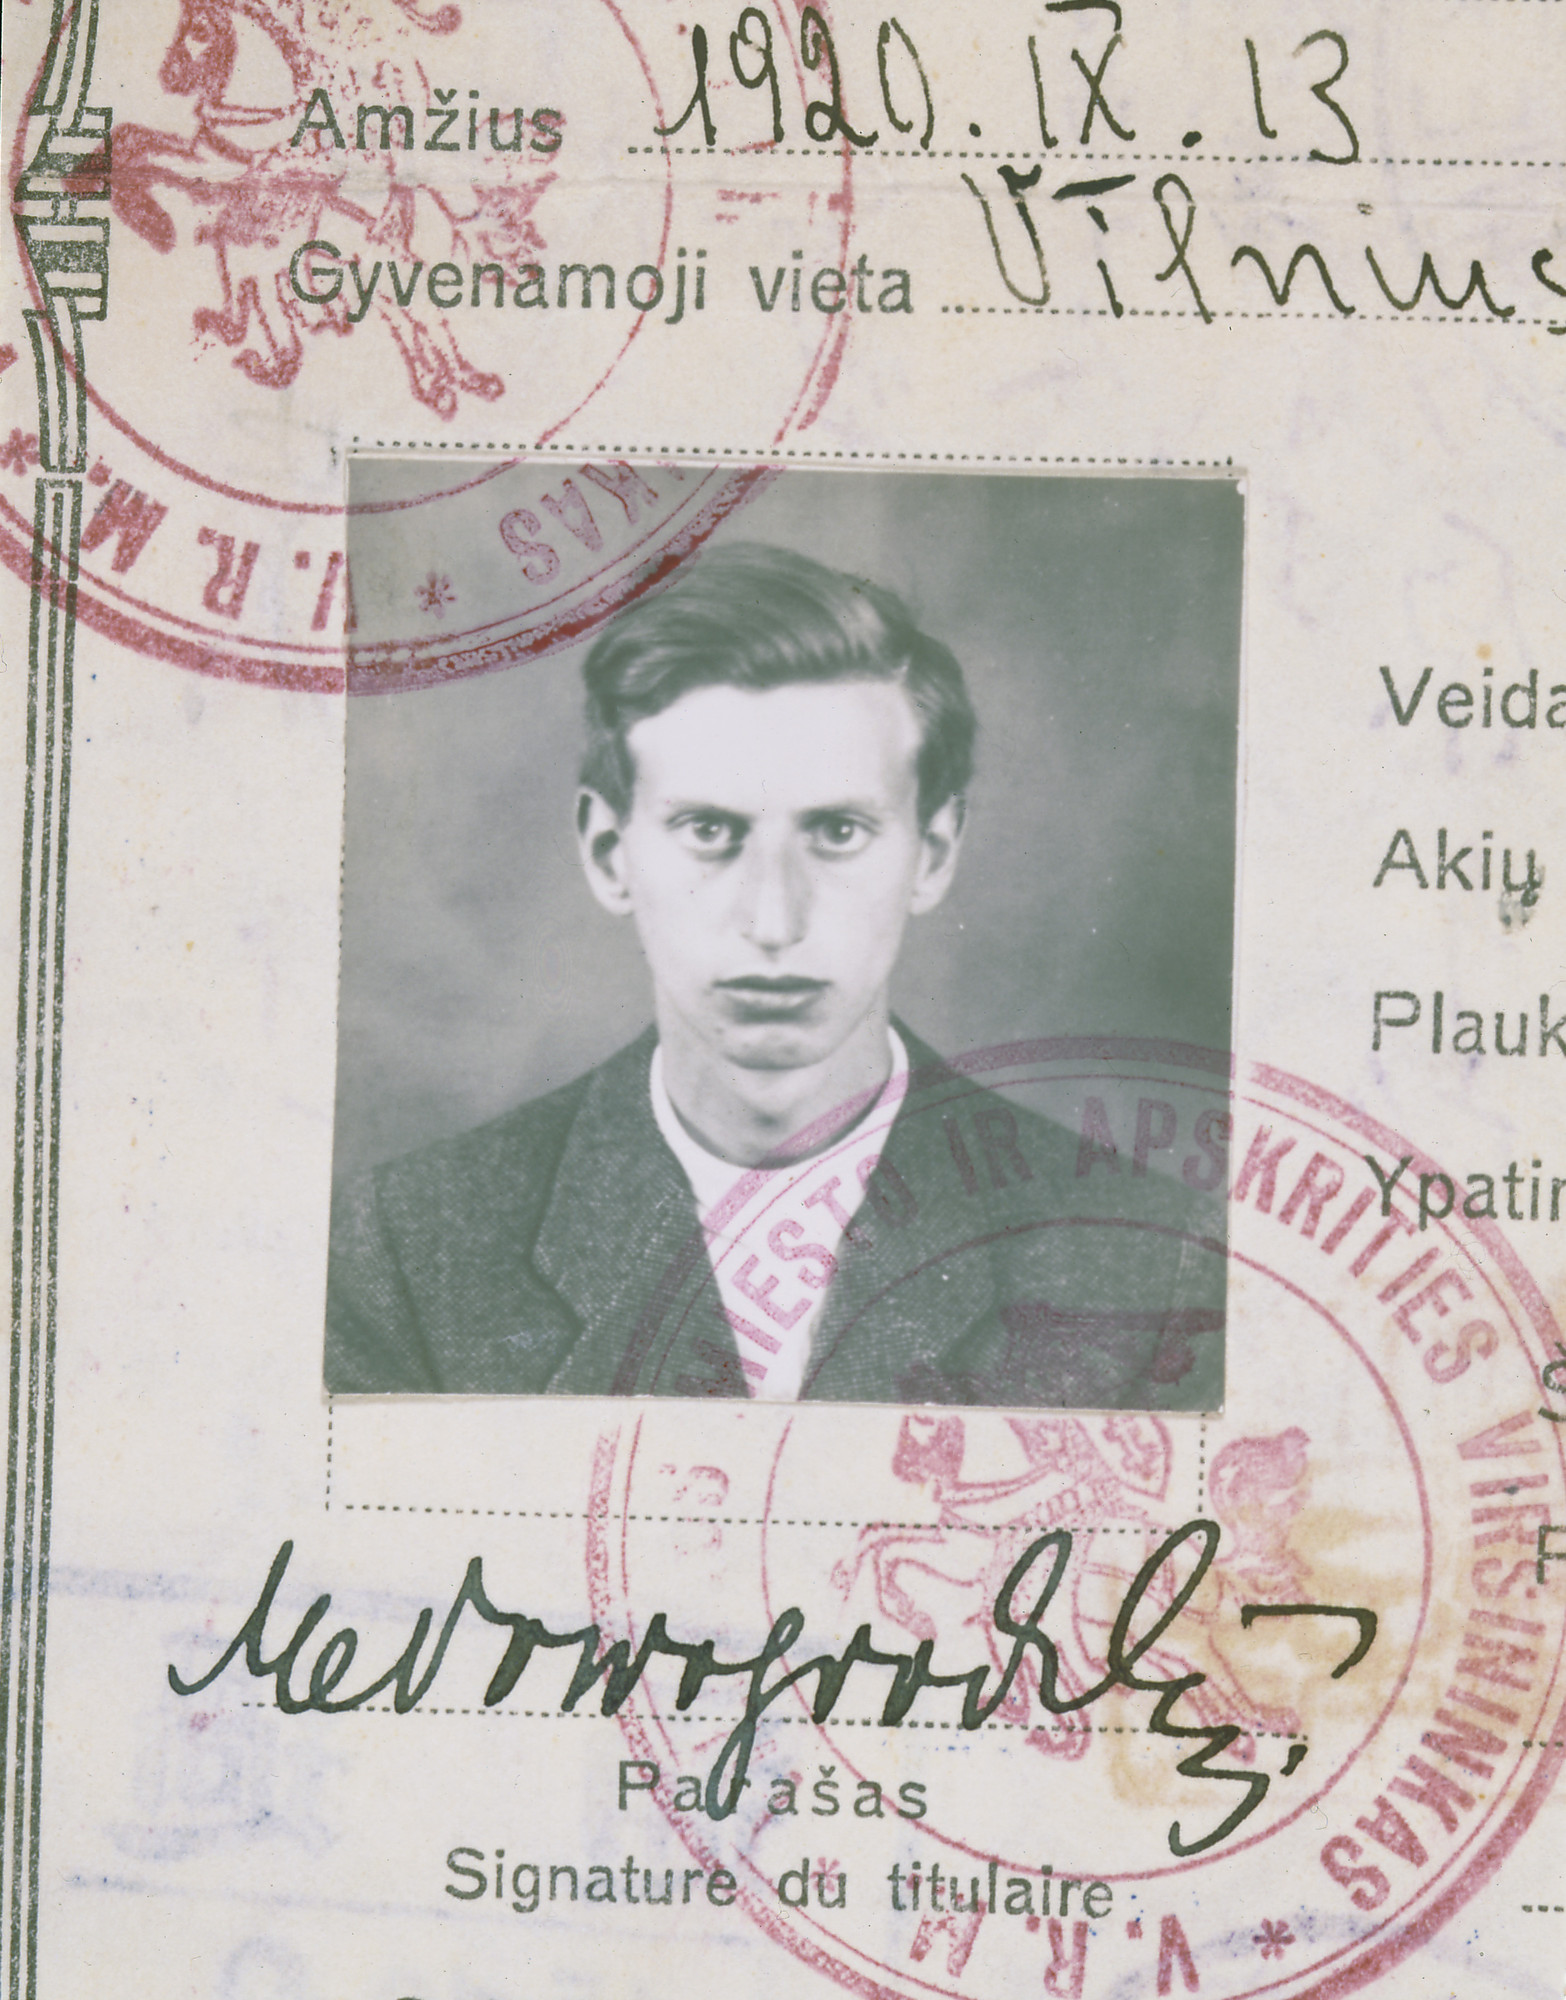 A closeup of the identification photograph adhered to the Lithuanian Safe Conduct Pass issued to Markus Nowogrodzki. This pass was eventually bound into a passport. It contains Sugihara ink stamps, two Russian transit visas, a Lithuanian stamp, an American non-immigration visa, and a Seattle entry stamp.

Sugihara visa (center left) issued with a legitimate emergency ("non-immigration") visa for the U.S. (bottom, far left) obtained in Kaunas in July 1940, one of only a few dozen U.S. visas issued before the consulate closed in mid-August, 1940.